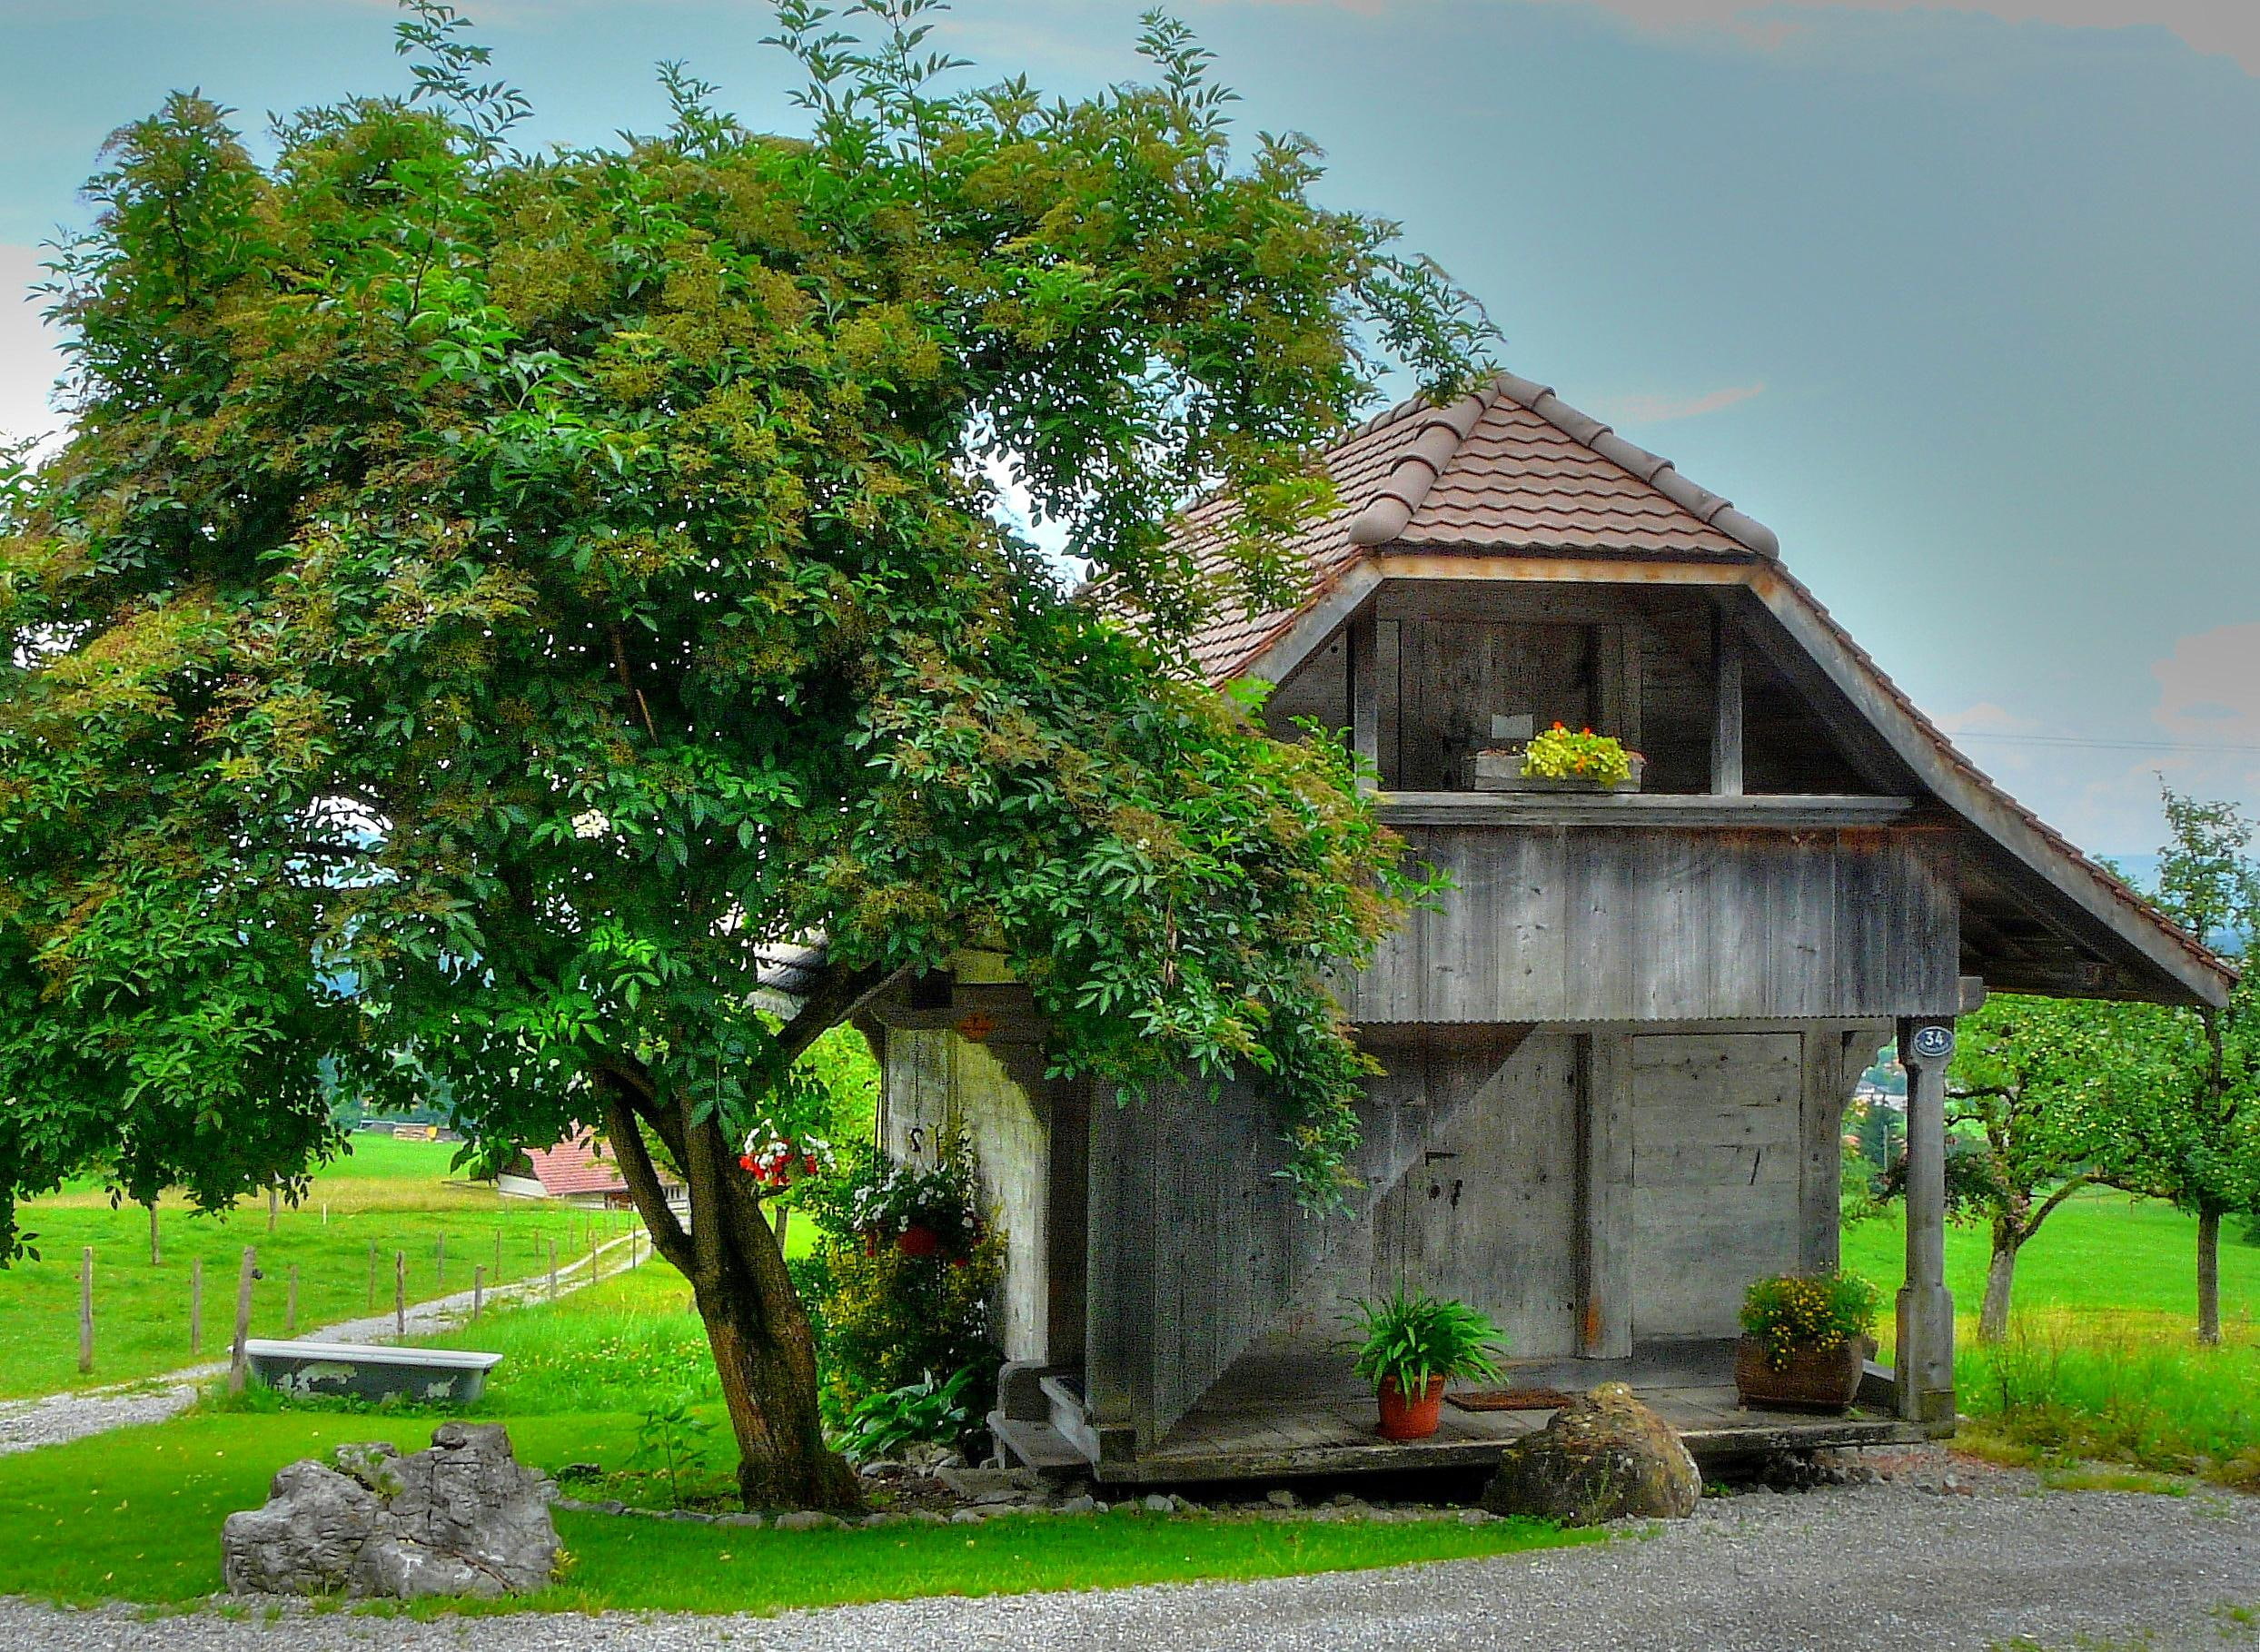 Garret - House- Hdr, colorful, cottage, tree, beautiful, green